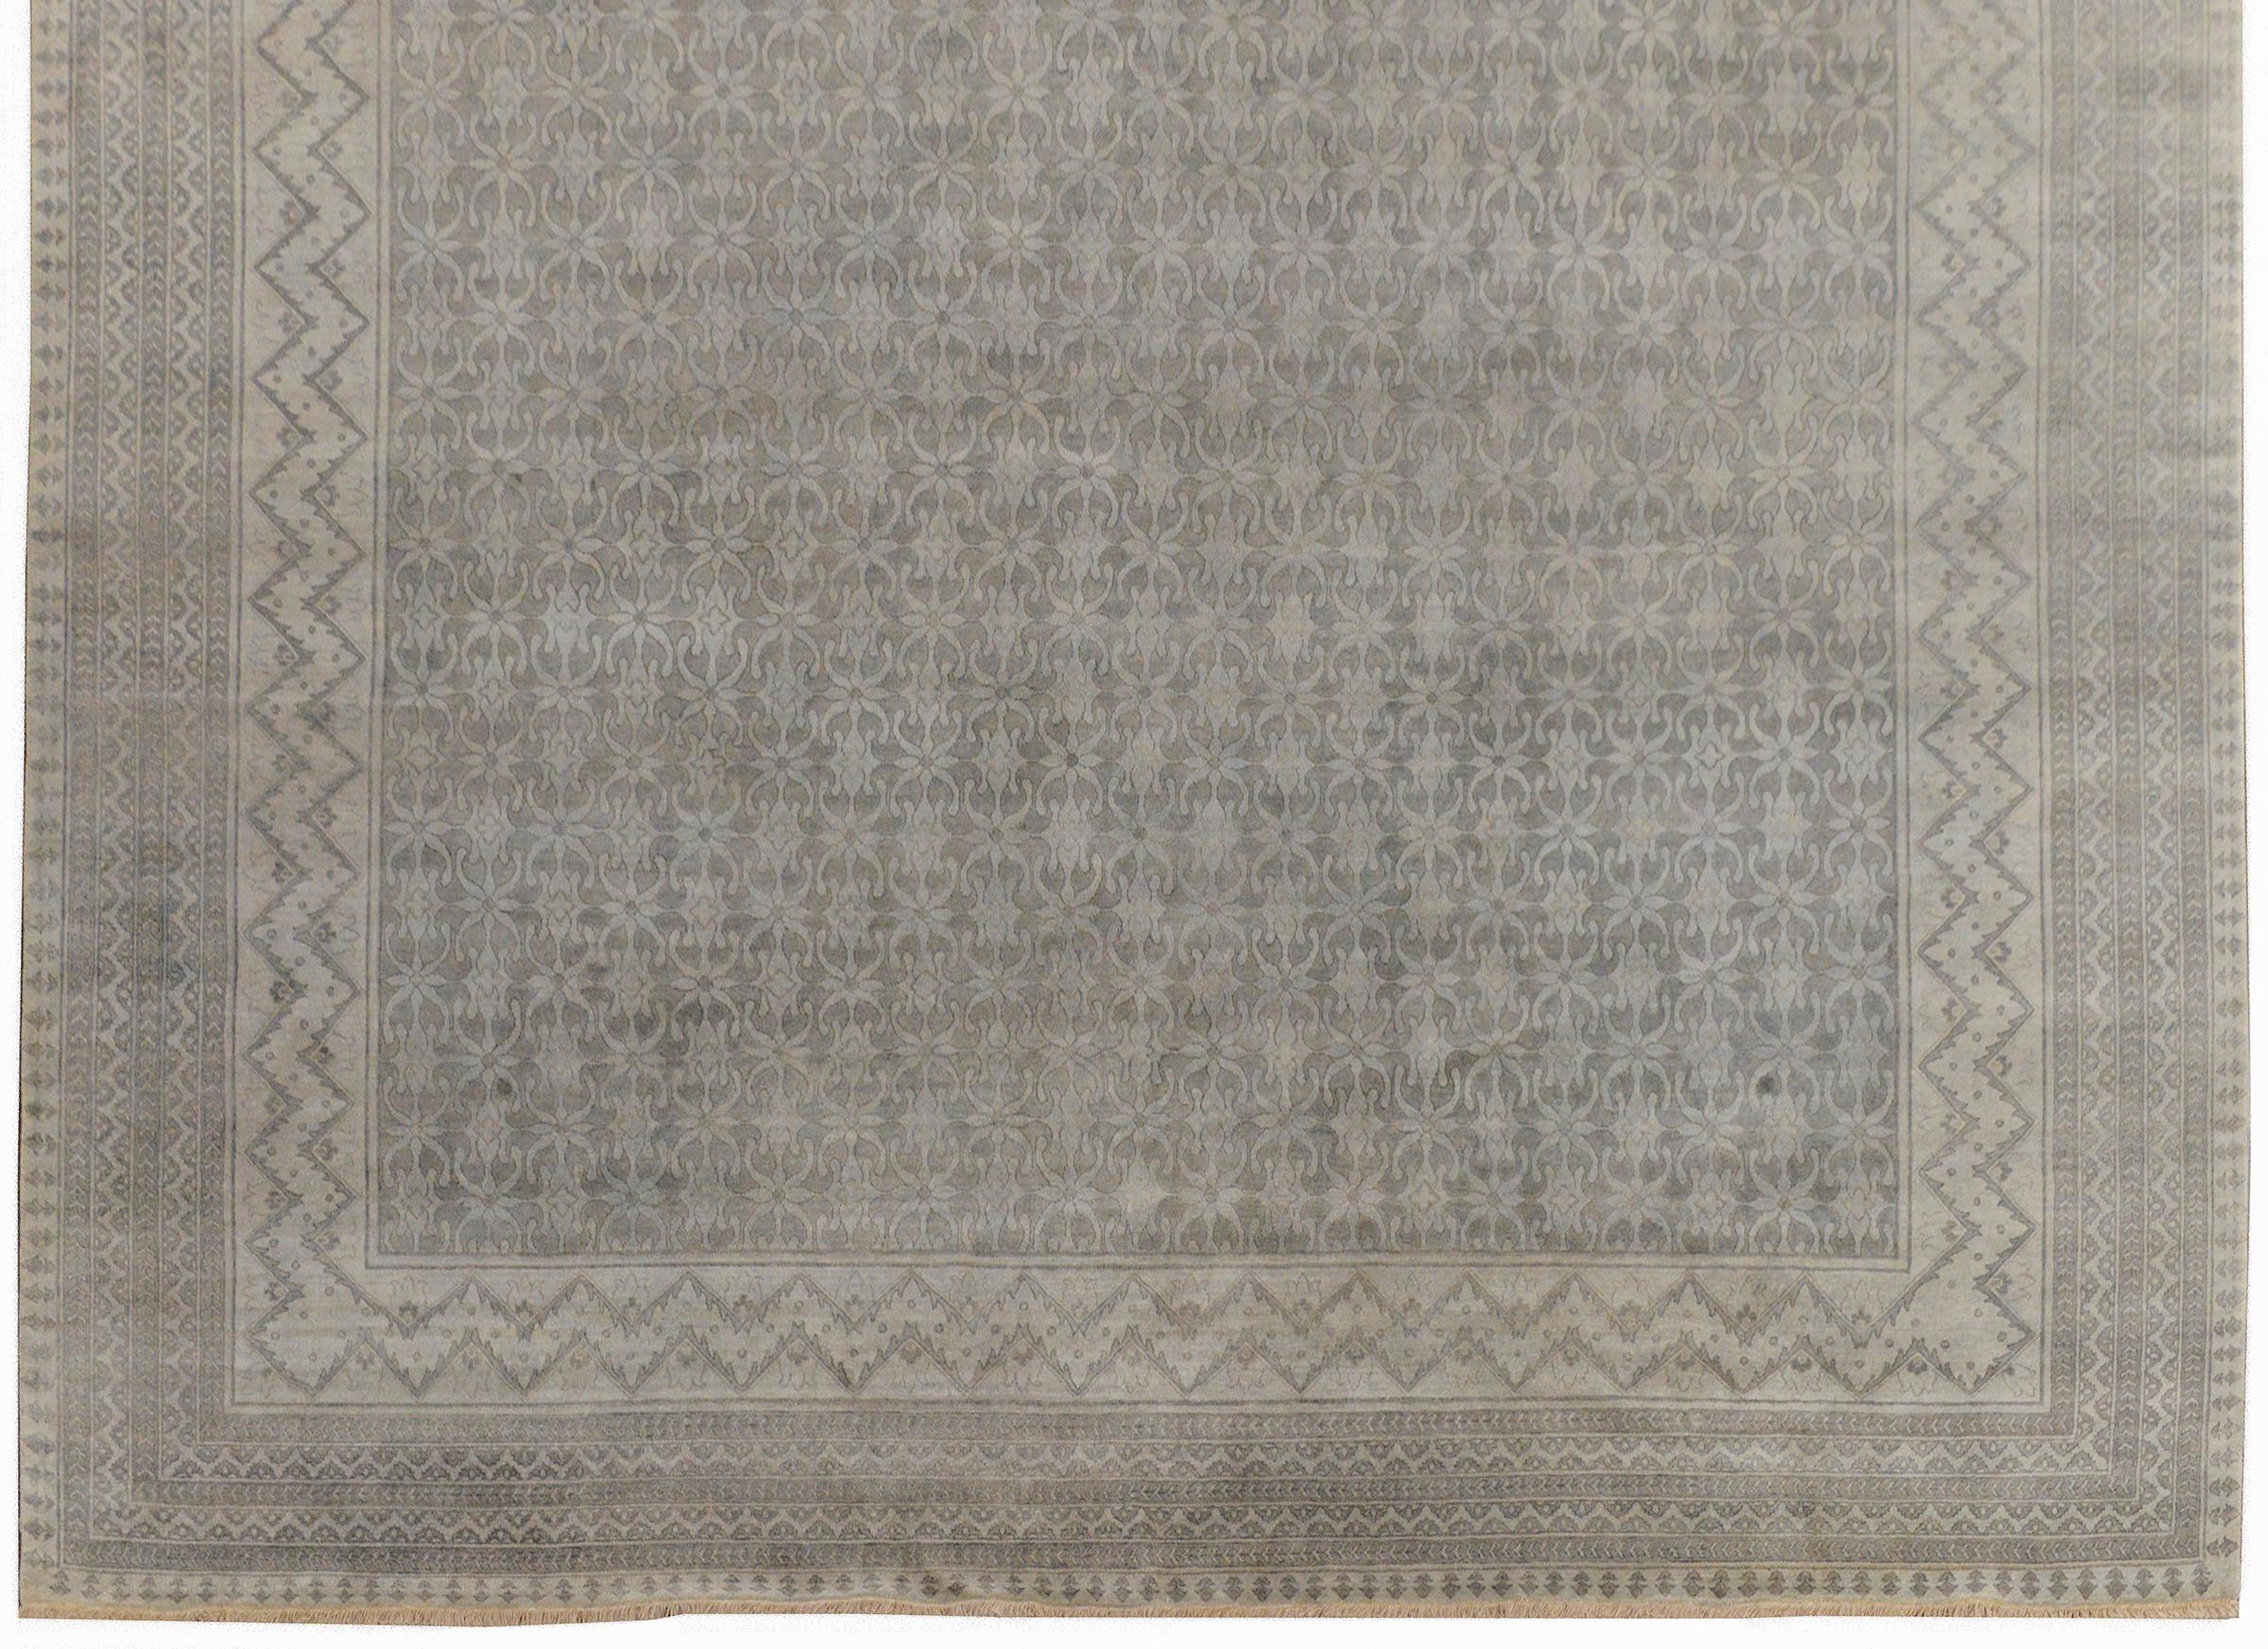 A beautiful and serene palatial size Indian Khanna rug woven with an all-over trellis floral pattern woven in varying shades of gray, and surrounded by several wide and narrow floral patterned stripes woven in similar grays as the field.